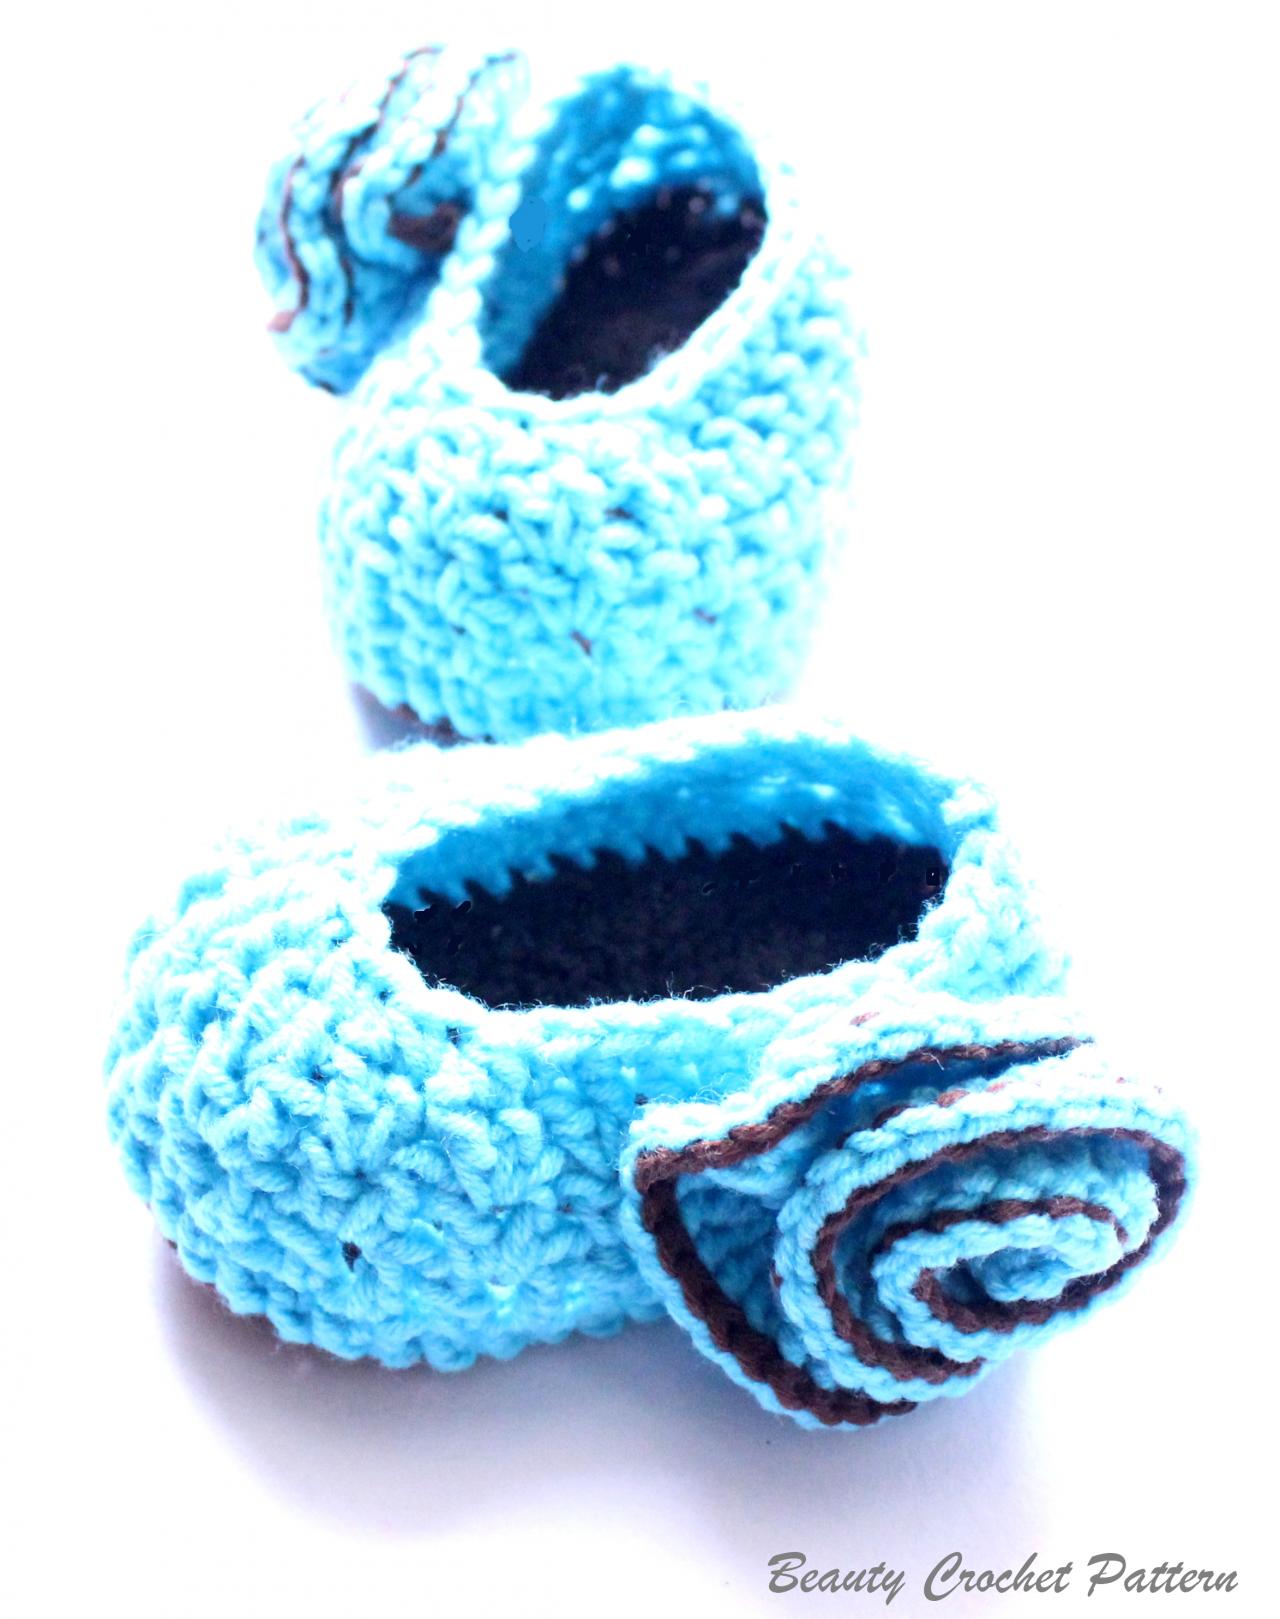 Crochet Shoes With Tea Rose Pattern Newborn Toddler Child Sizes